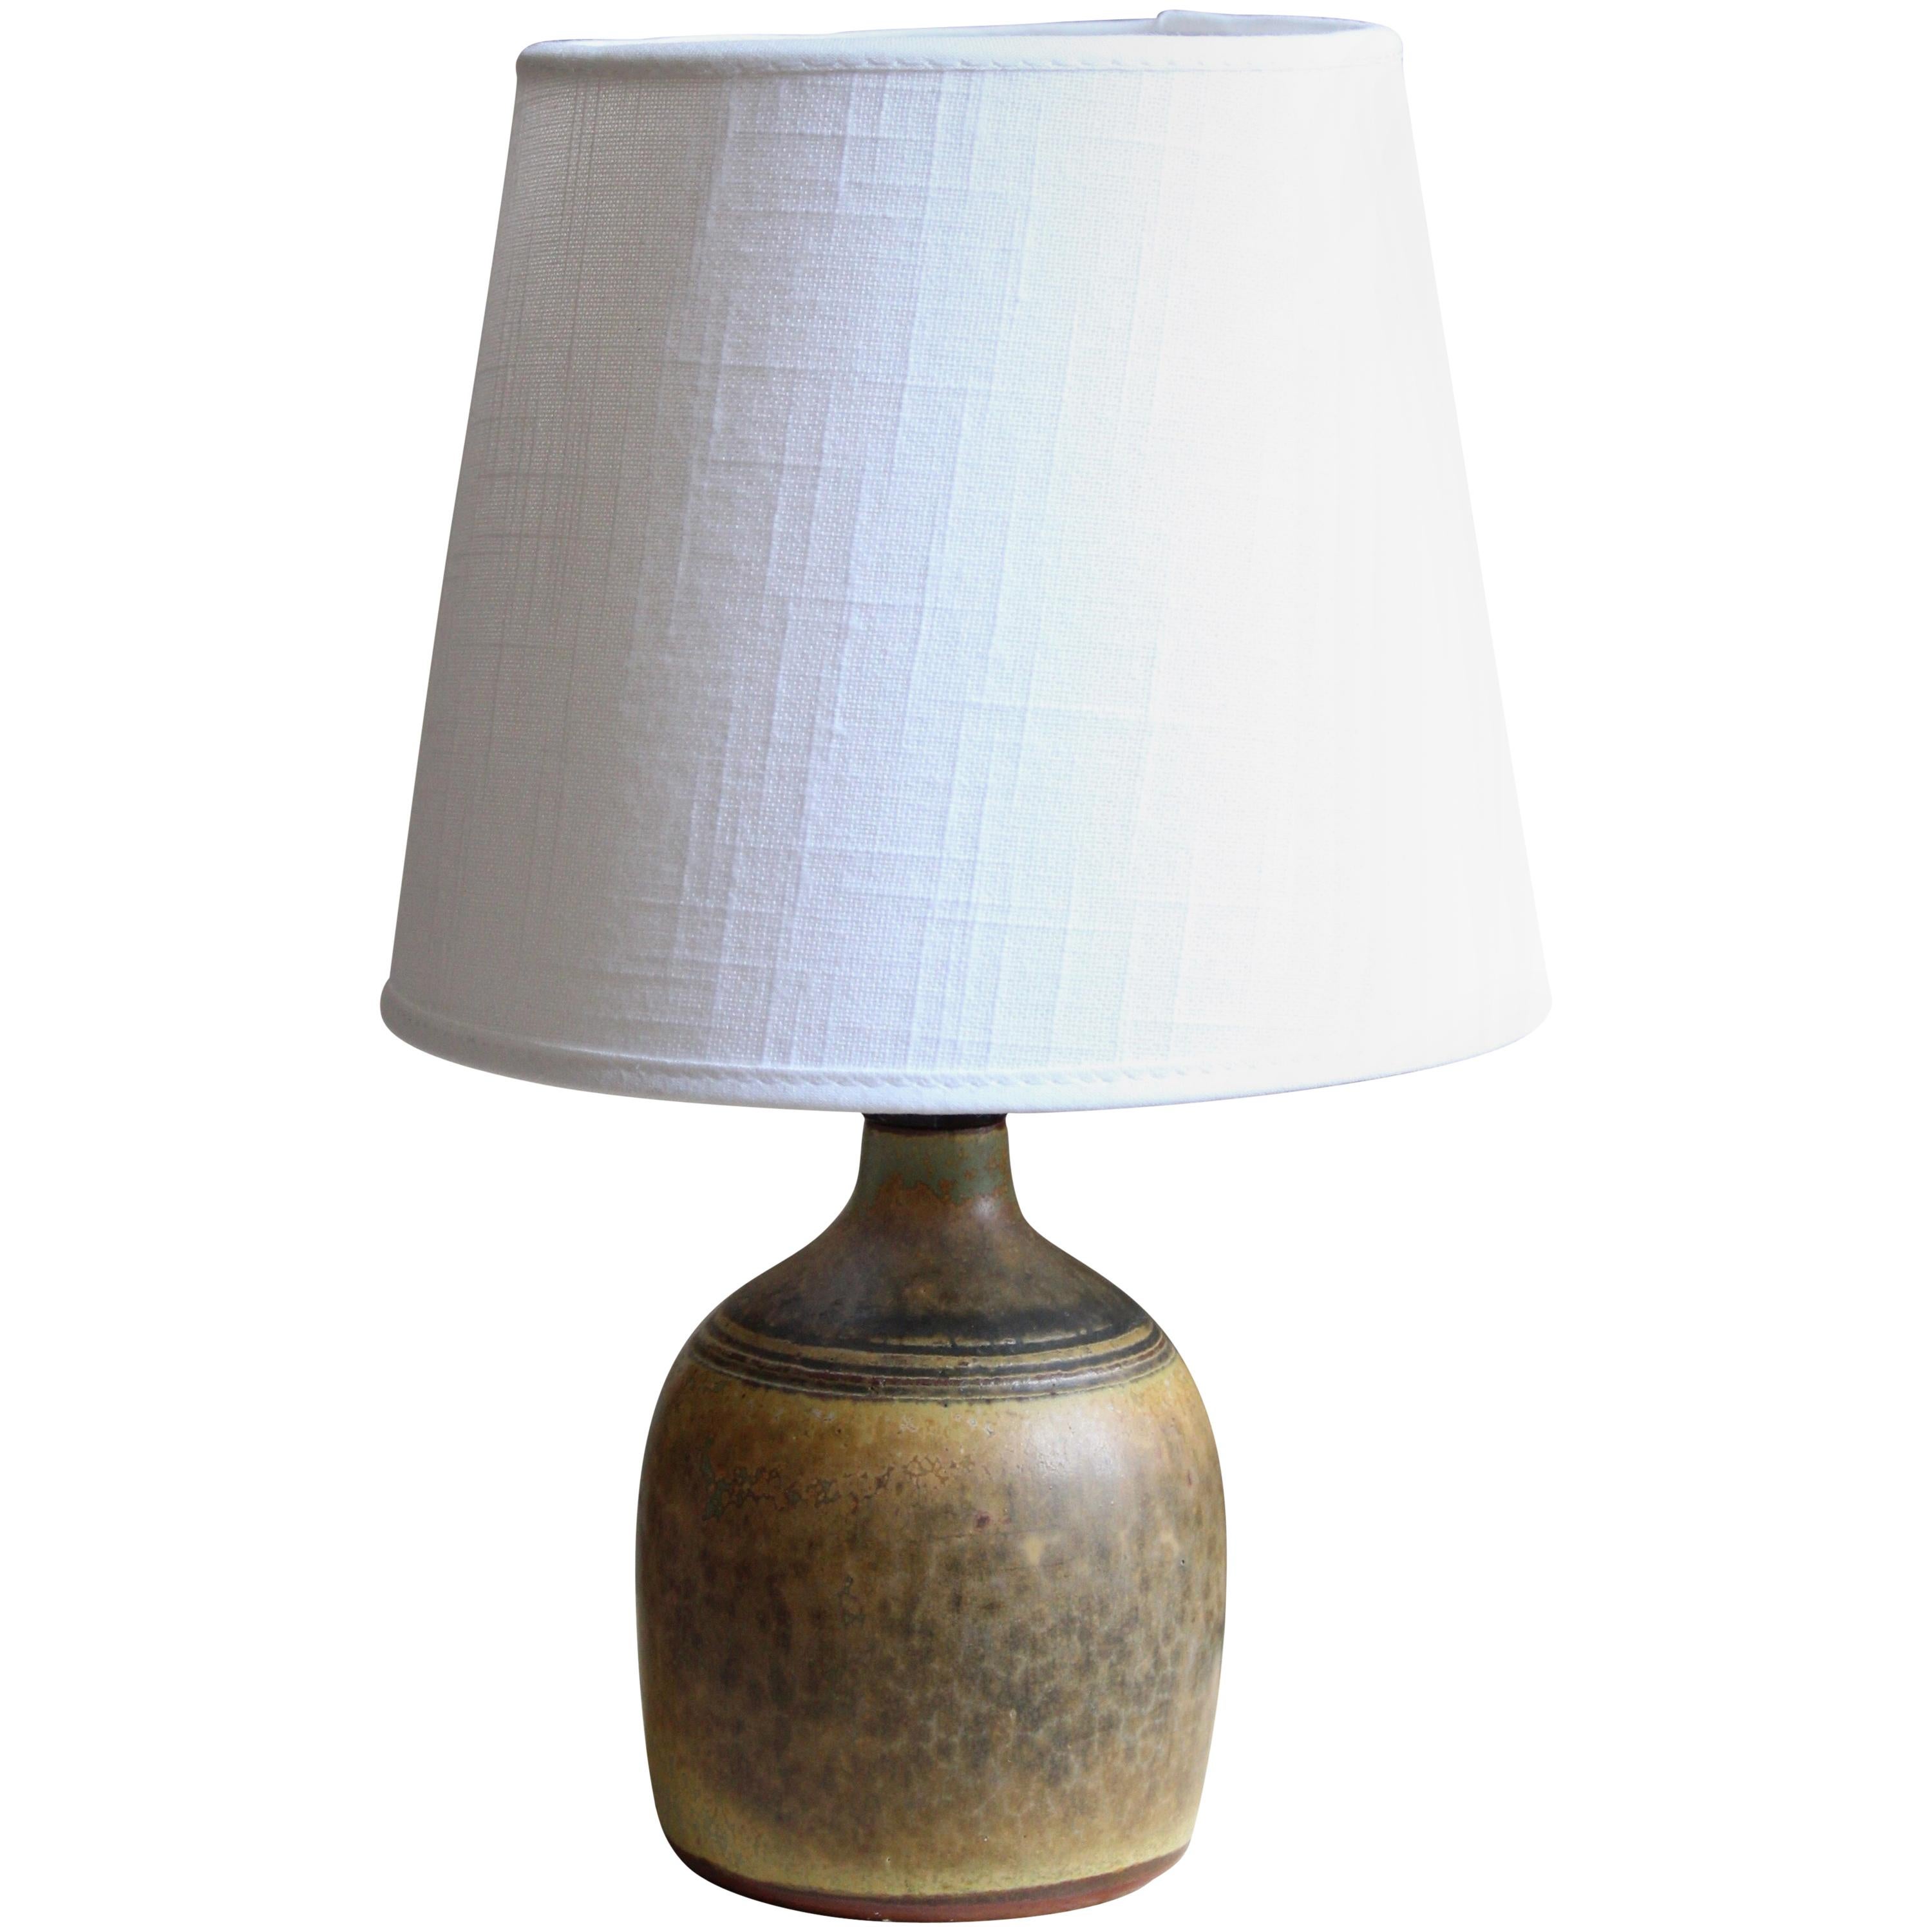 Rolf Palm, Small Table Lamp, Glazed Stoneware, Linen, Mölle, Sweden, 1962